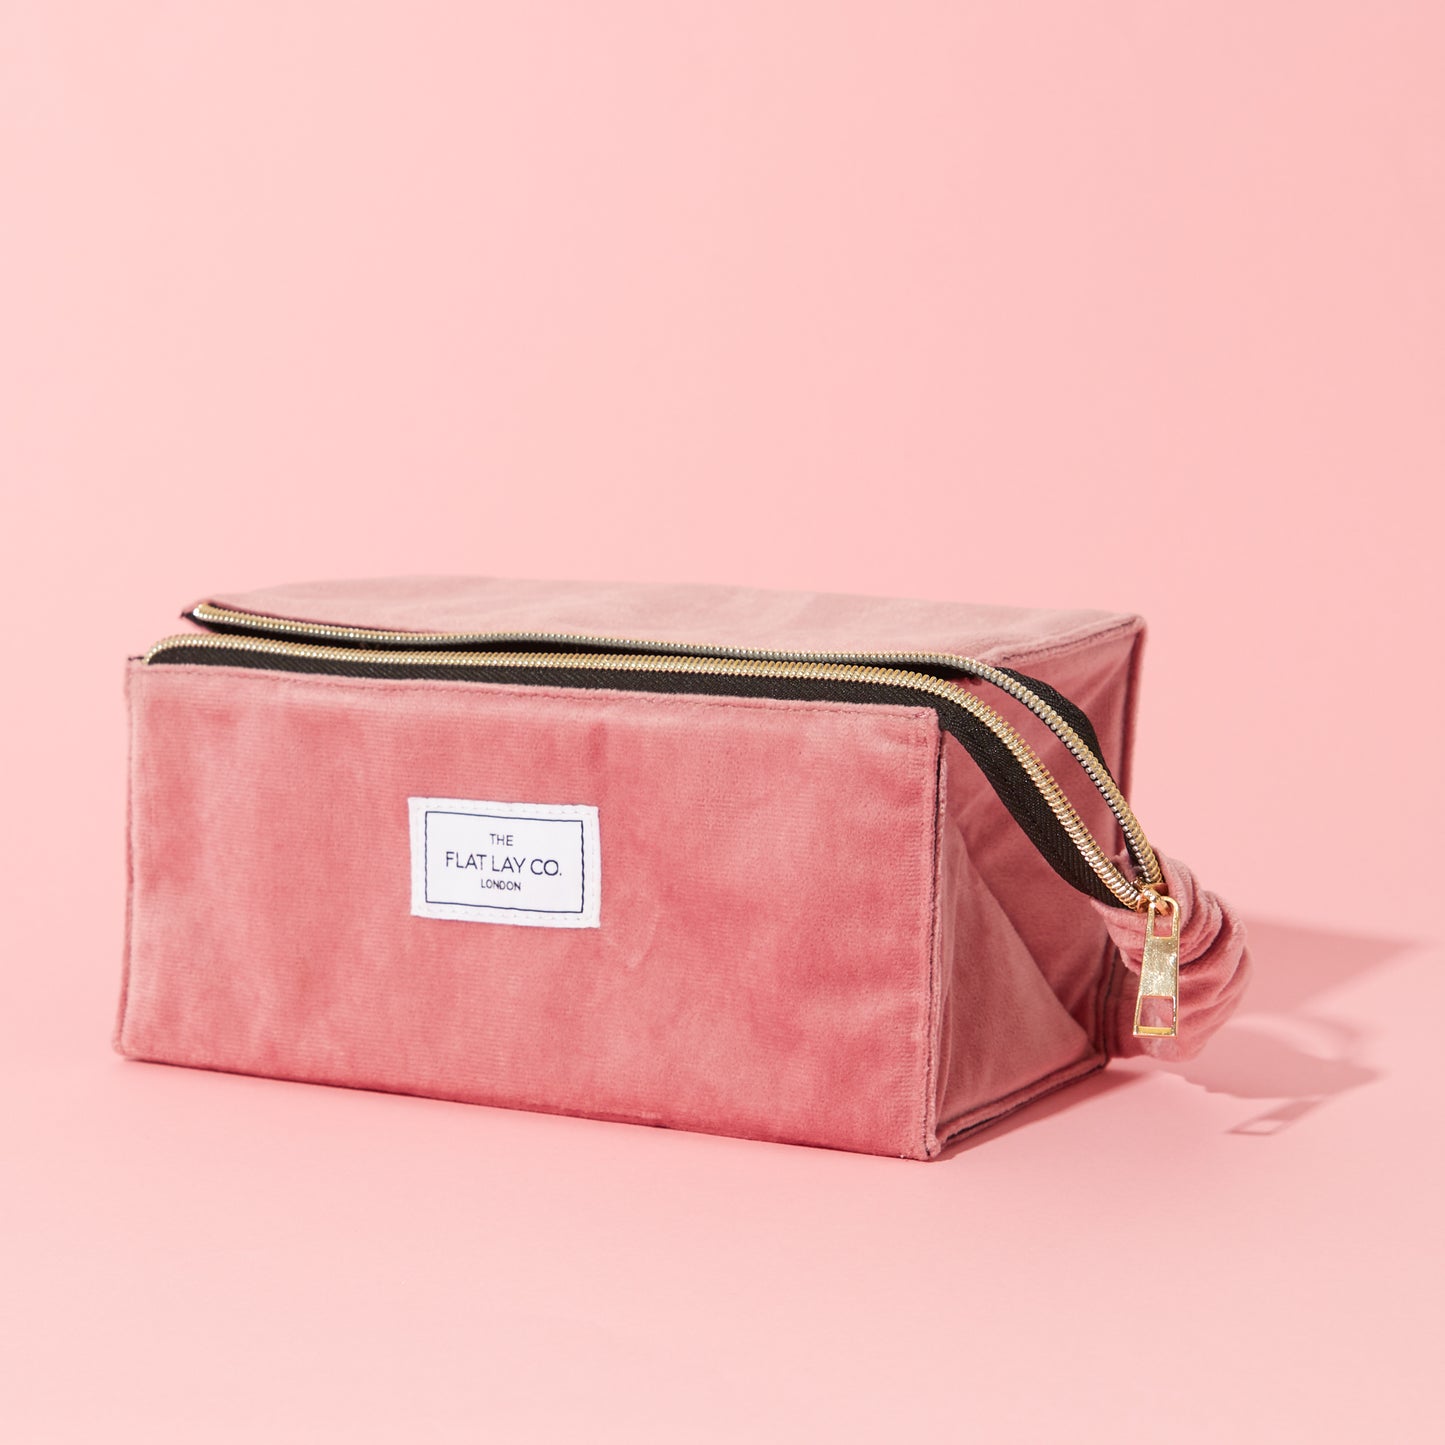 Pink Velvet Open Flat Makeup Box Bag and Tray